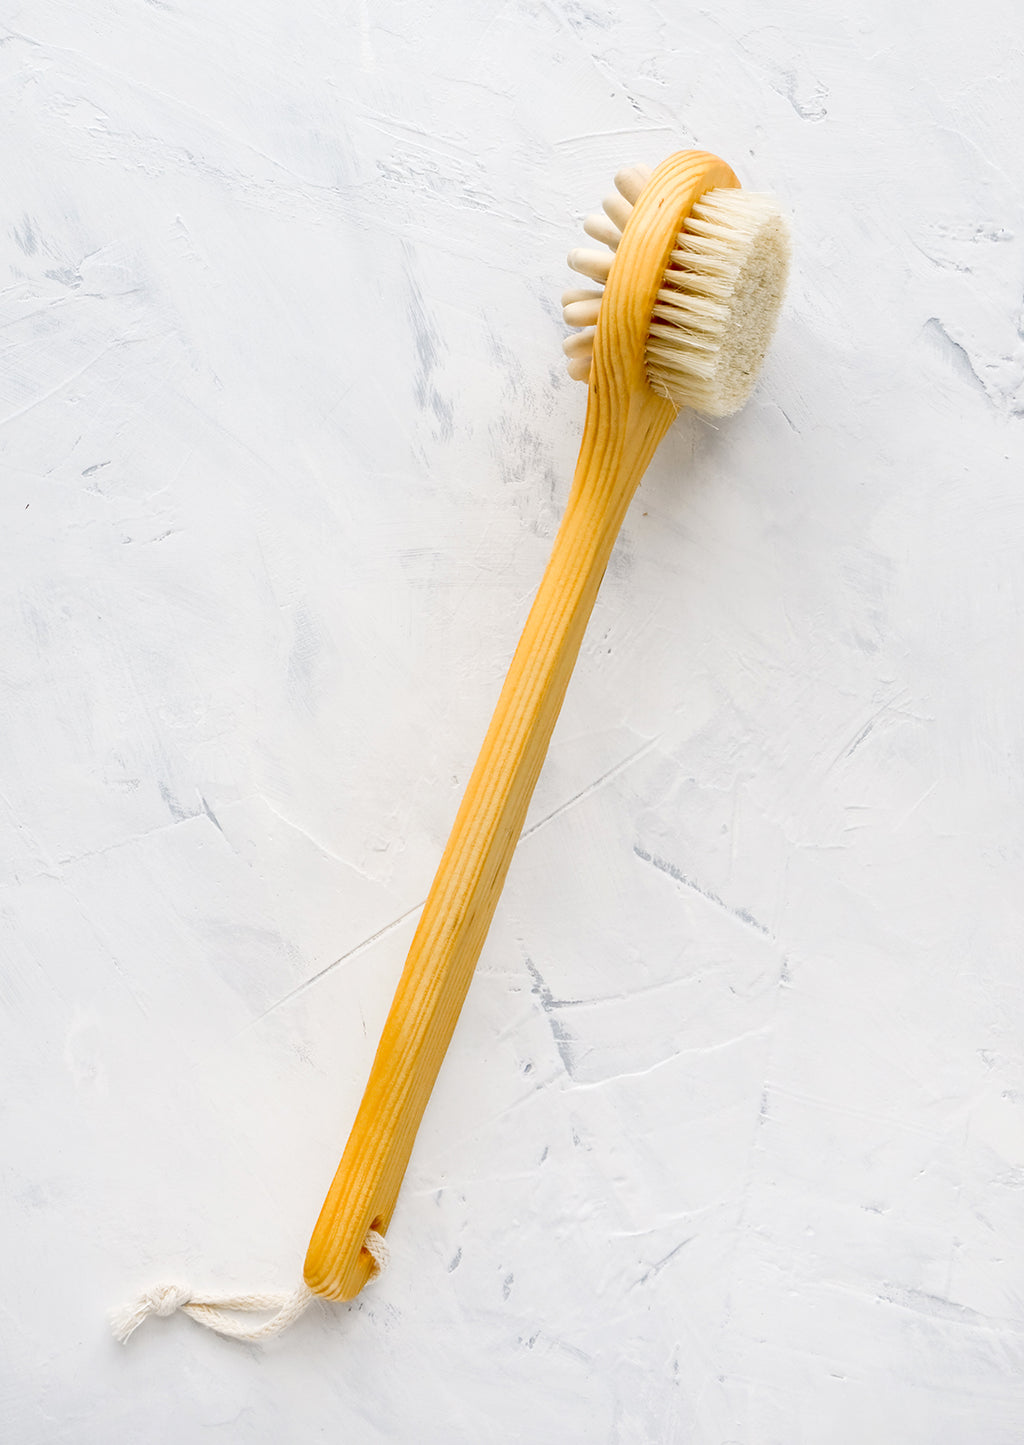 1: Long-handled cedar brush for using in the shower, featuring a brush side and a massager side.